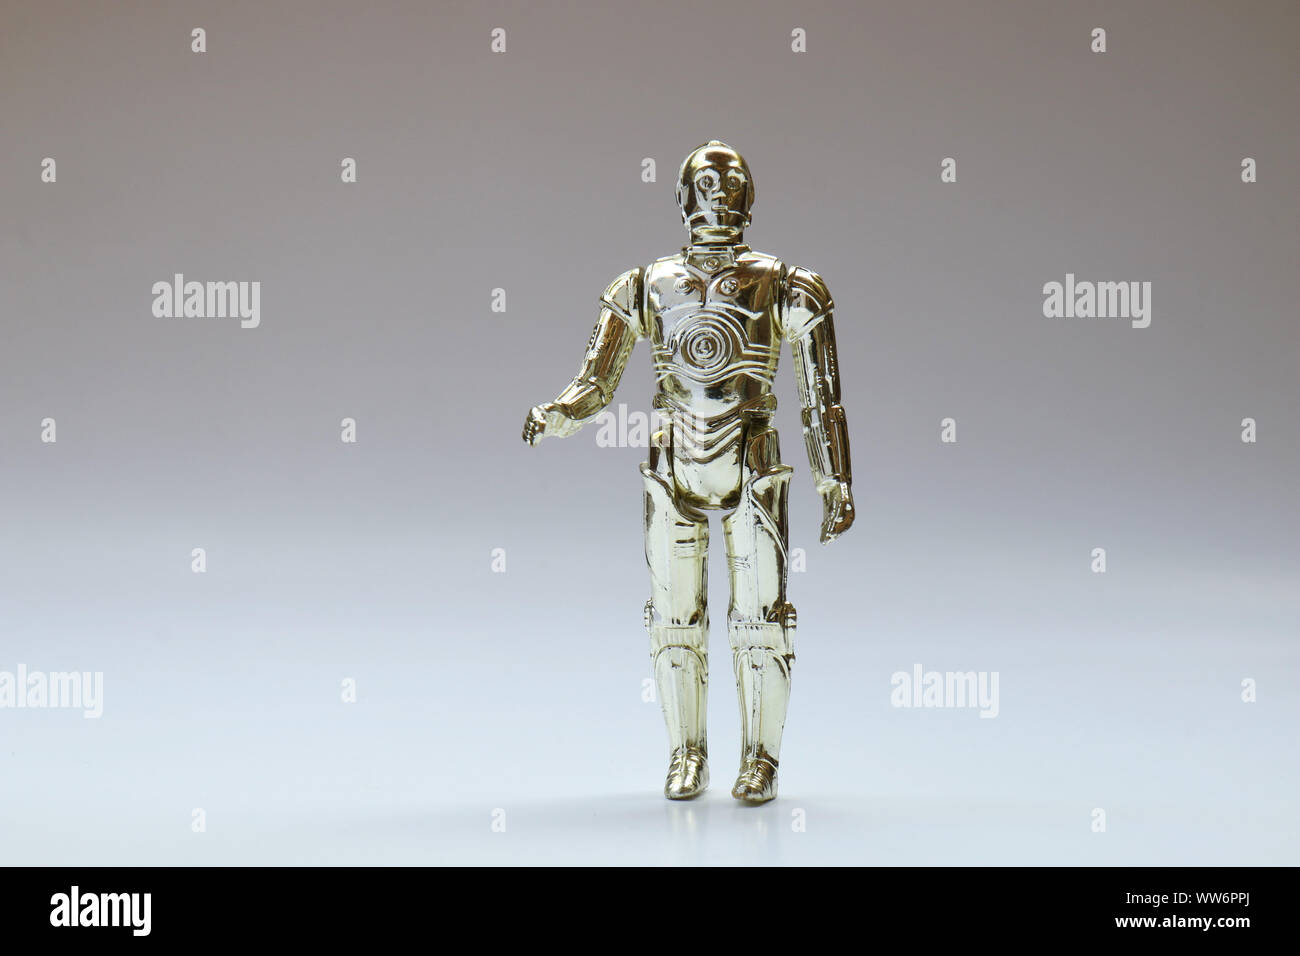 BERLIN - AUGUST 29, 2019: Vintage Star Wars C-3PO Action Figure from Kenner Toys on White. This was released with the Movie 'The Empire Strikes Back'. Stock Photo